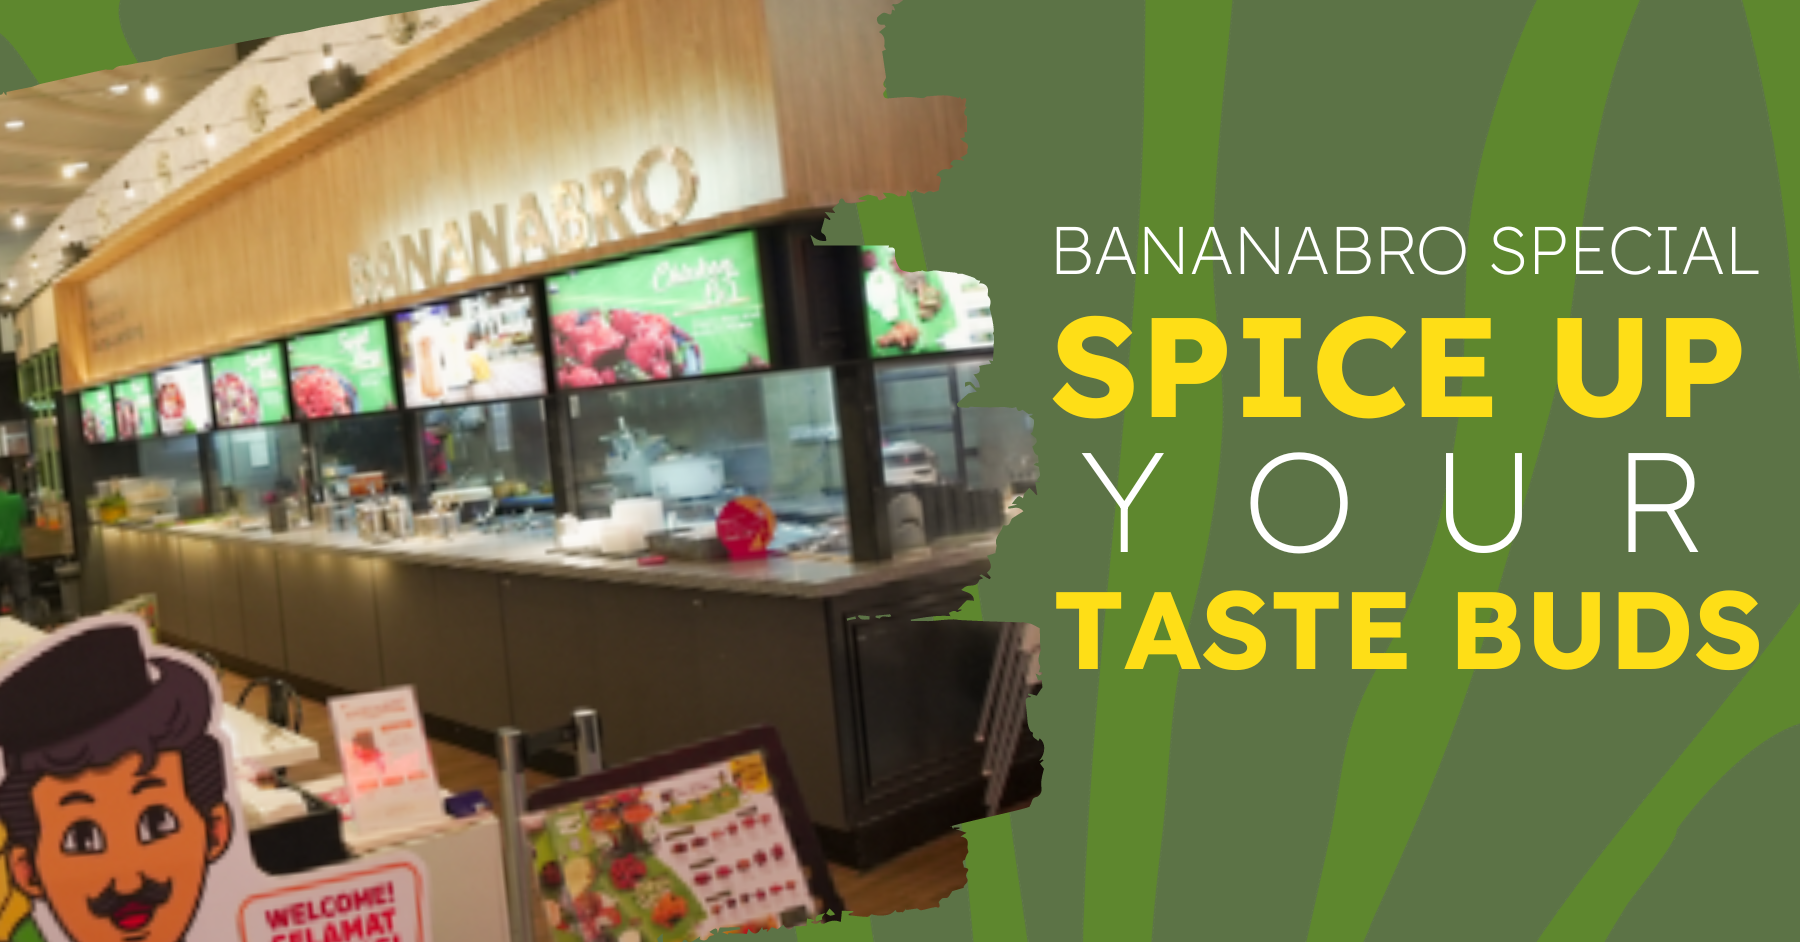 BananaBro Specials: Light Up Your Taste Buds With These Menu Items